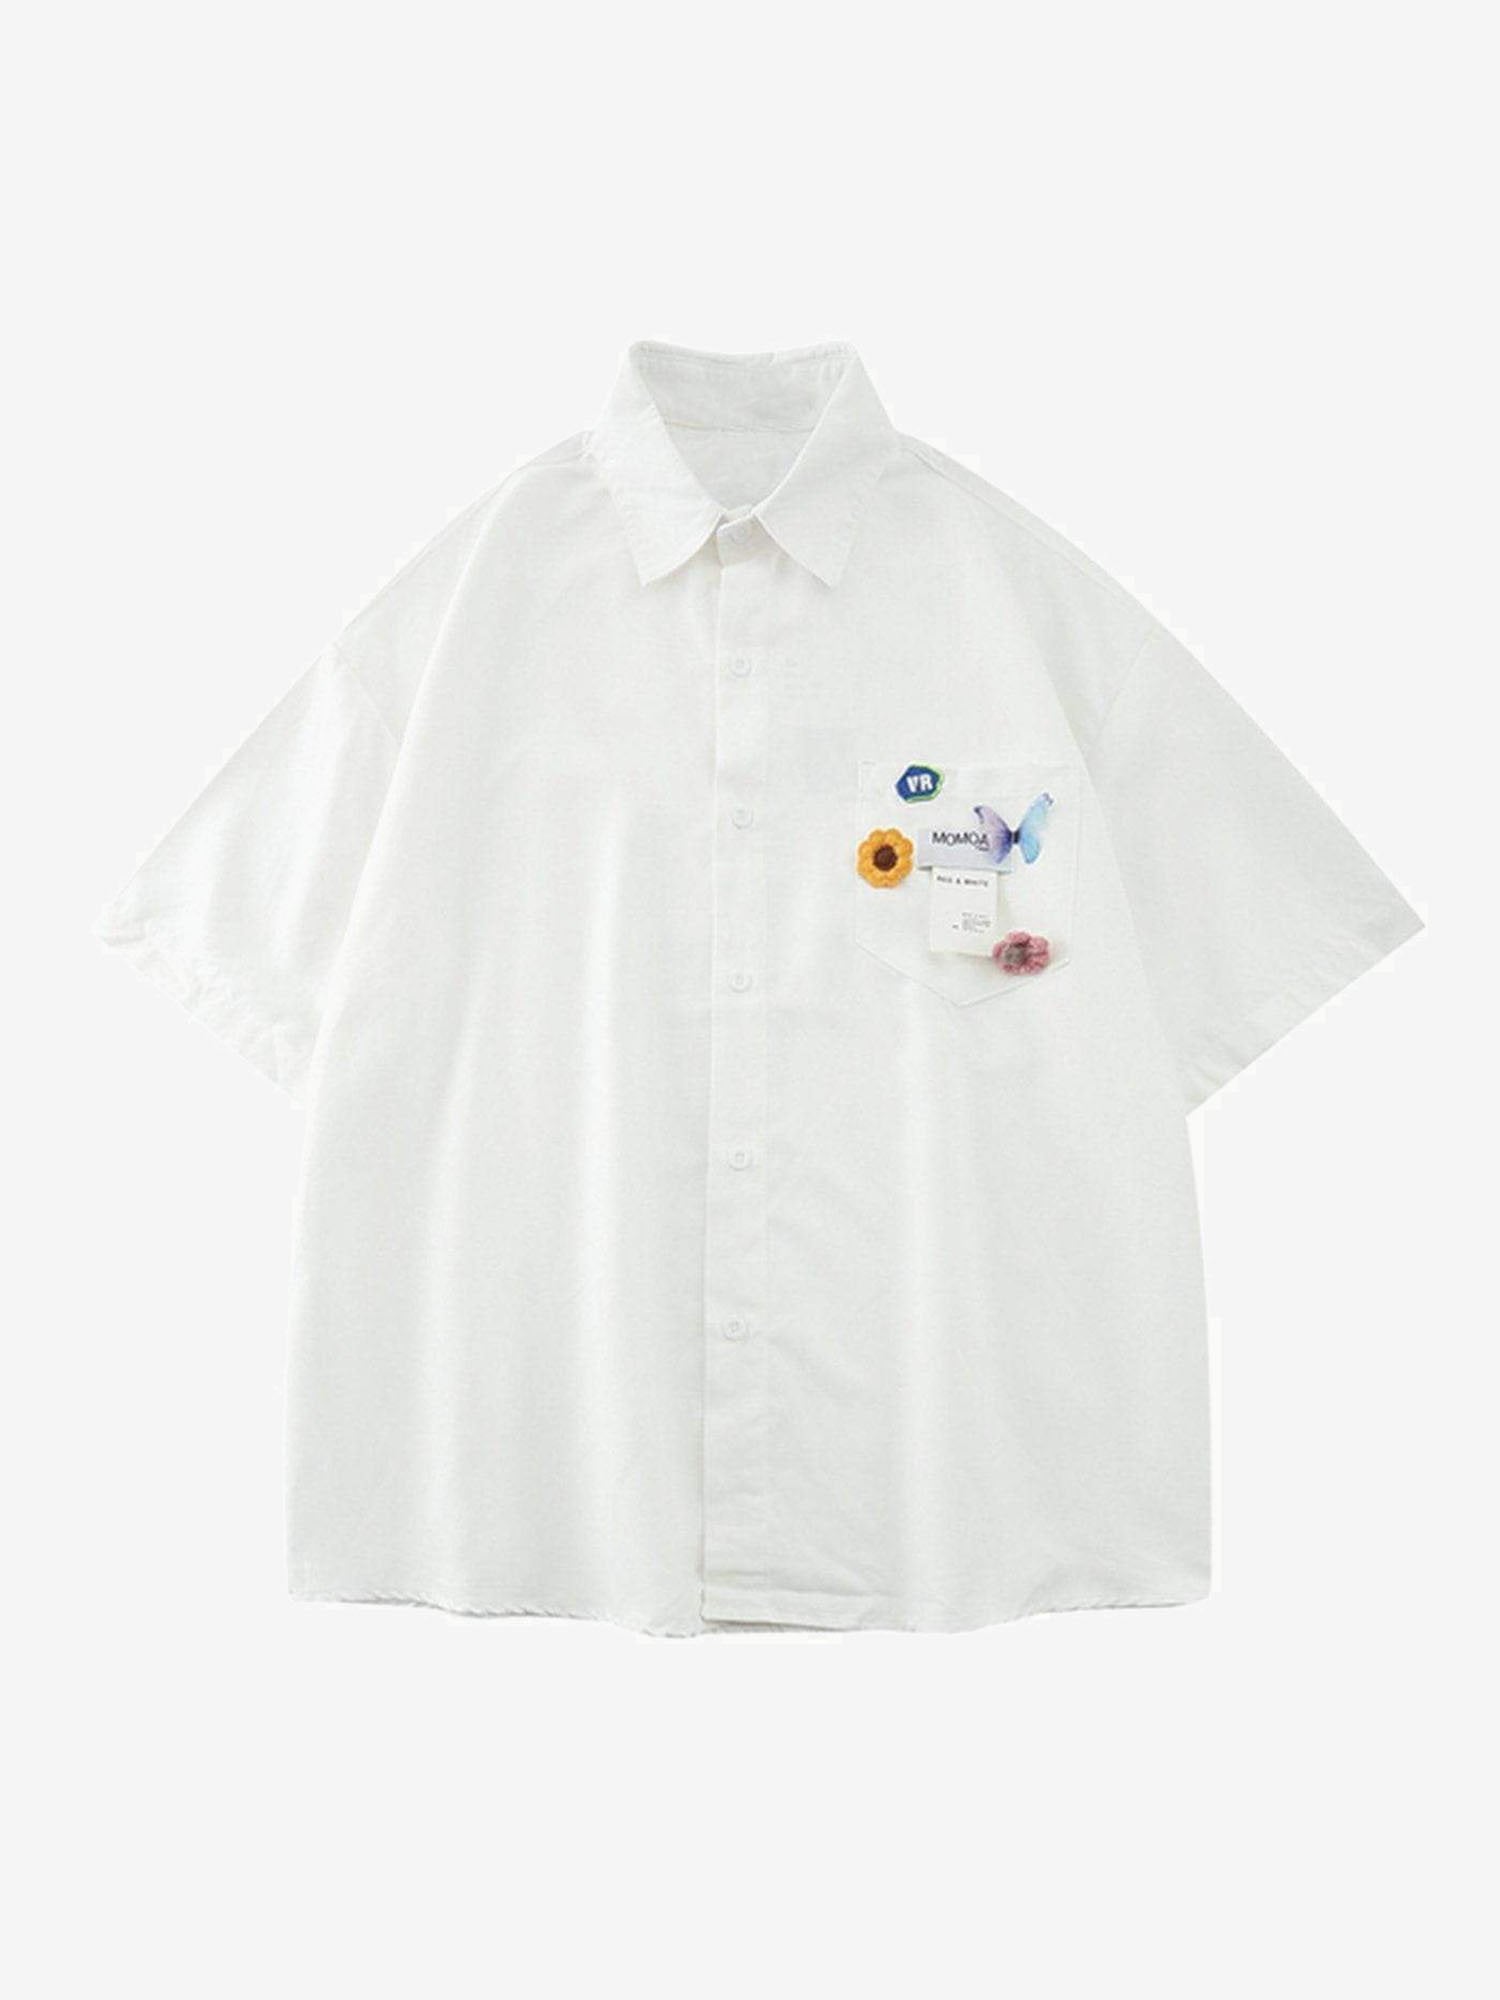 JUSTNOTAG Butterfly Embroidered Pocket Short Sleeve Shirt